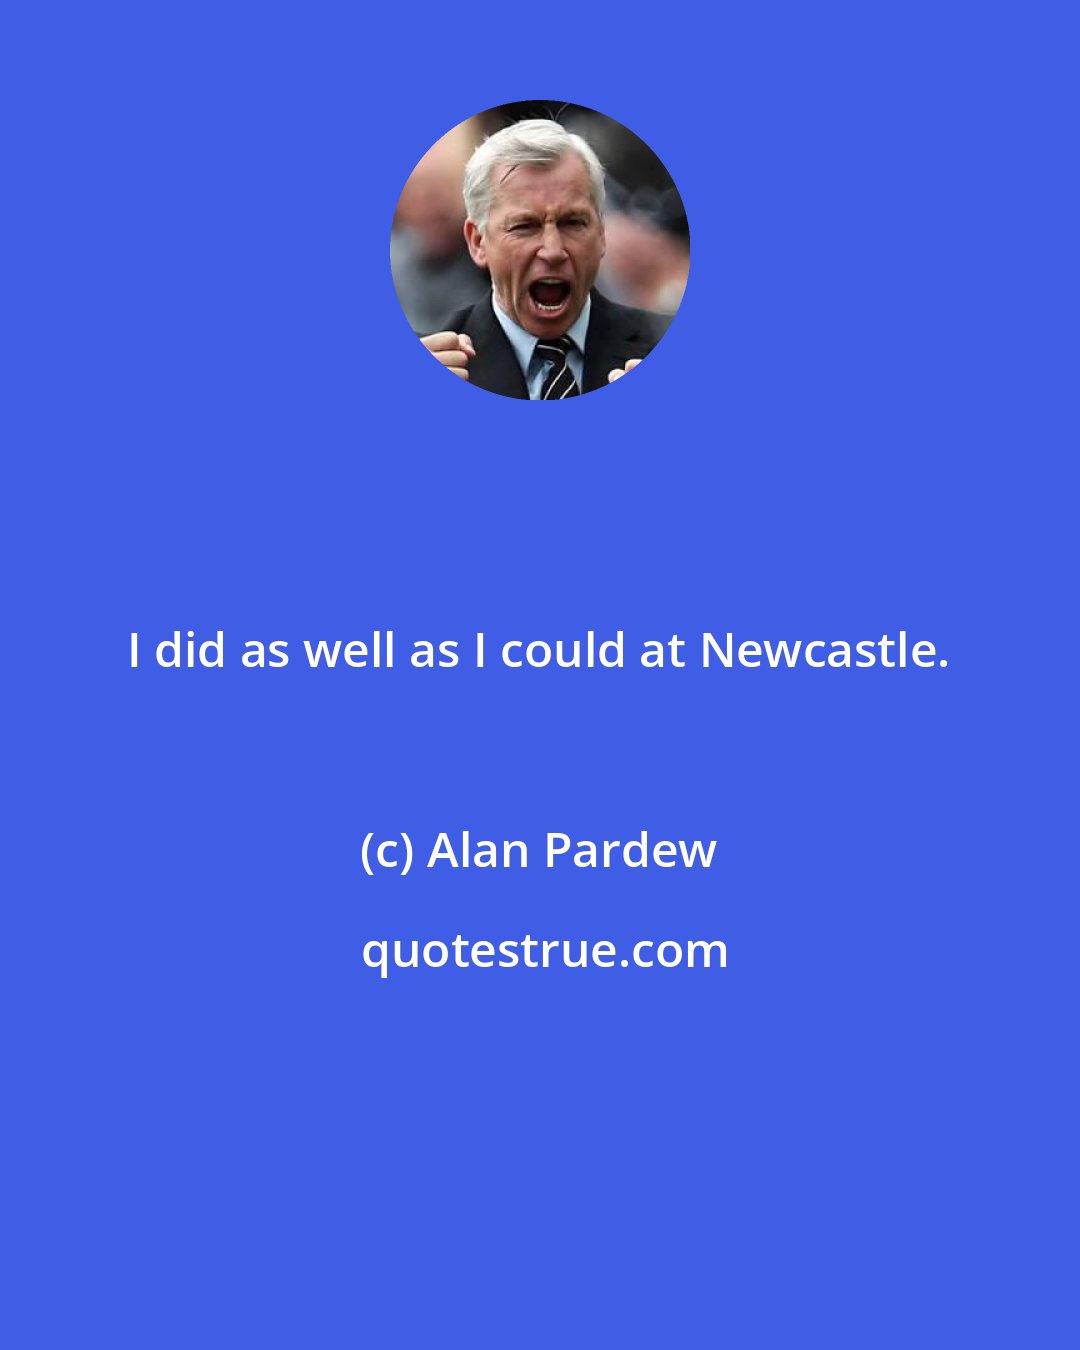 Alan Pardew: I did as well as I could at Newcastle.